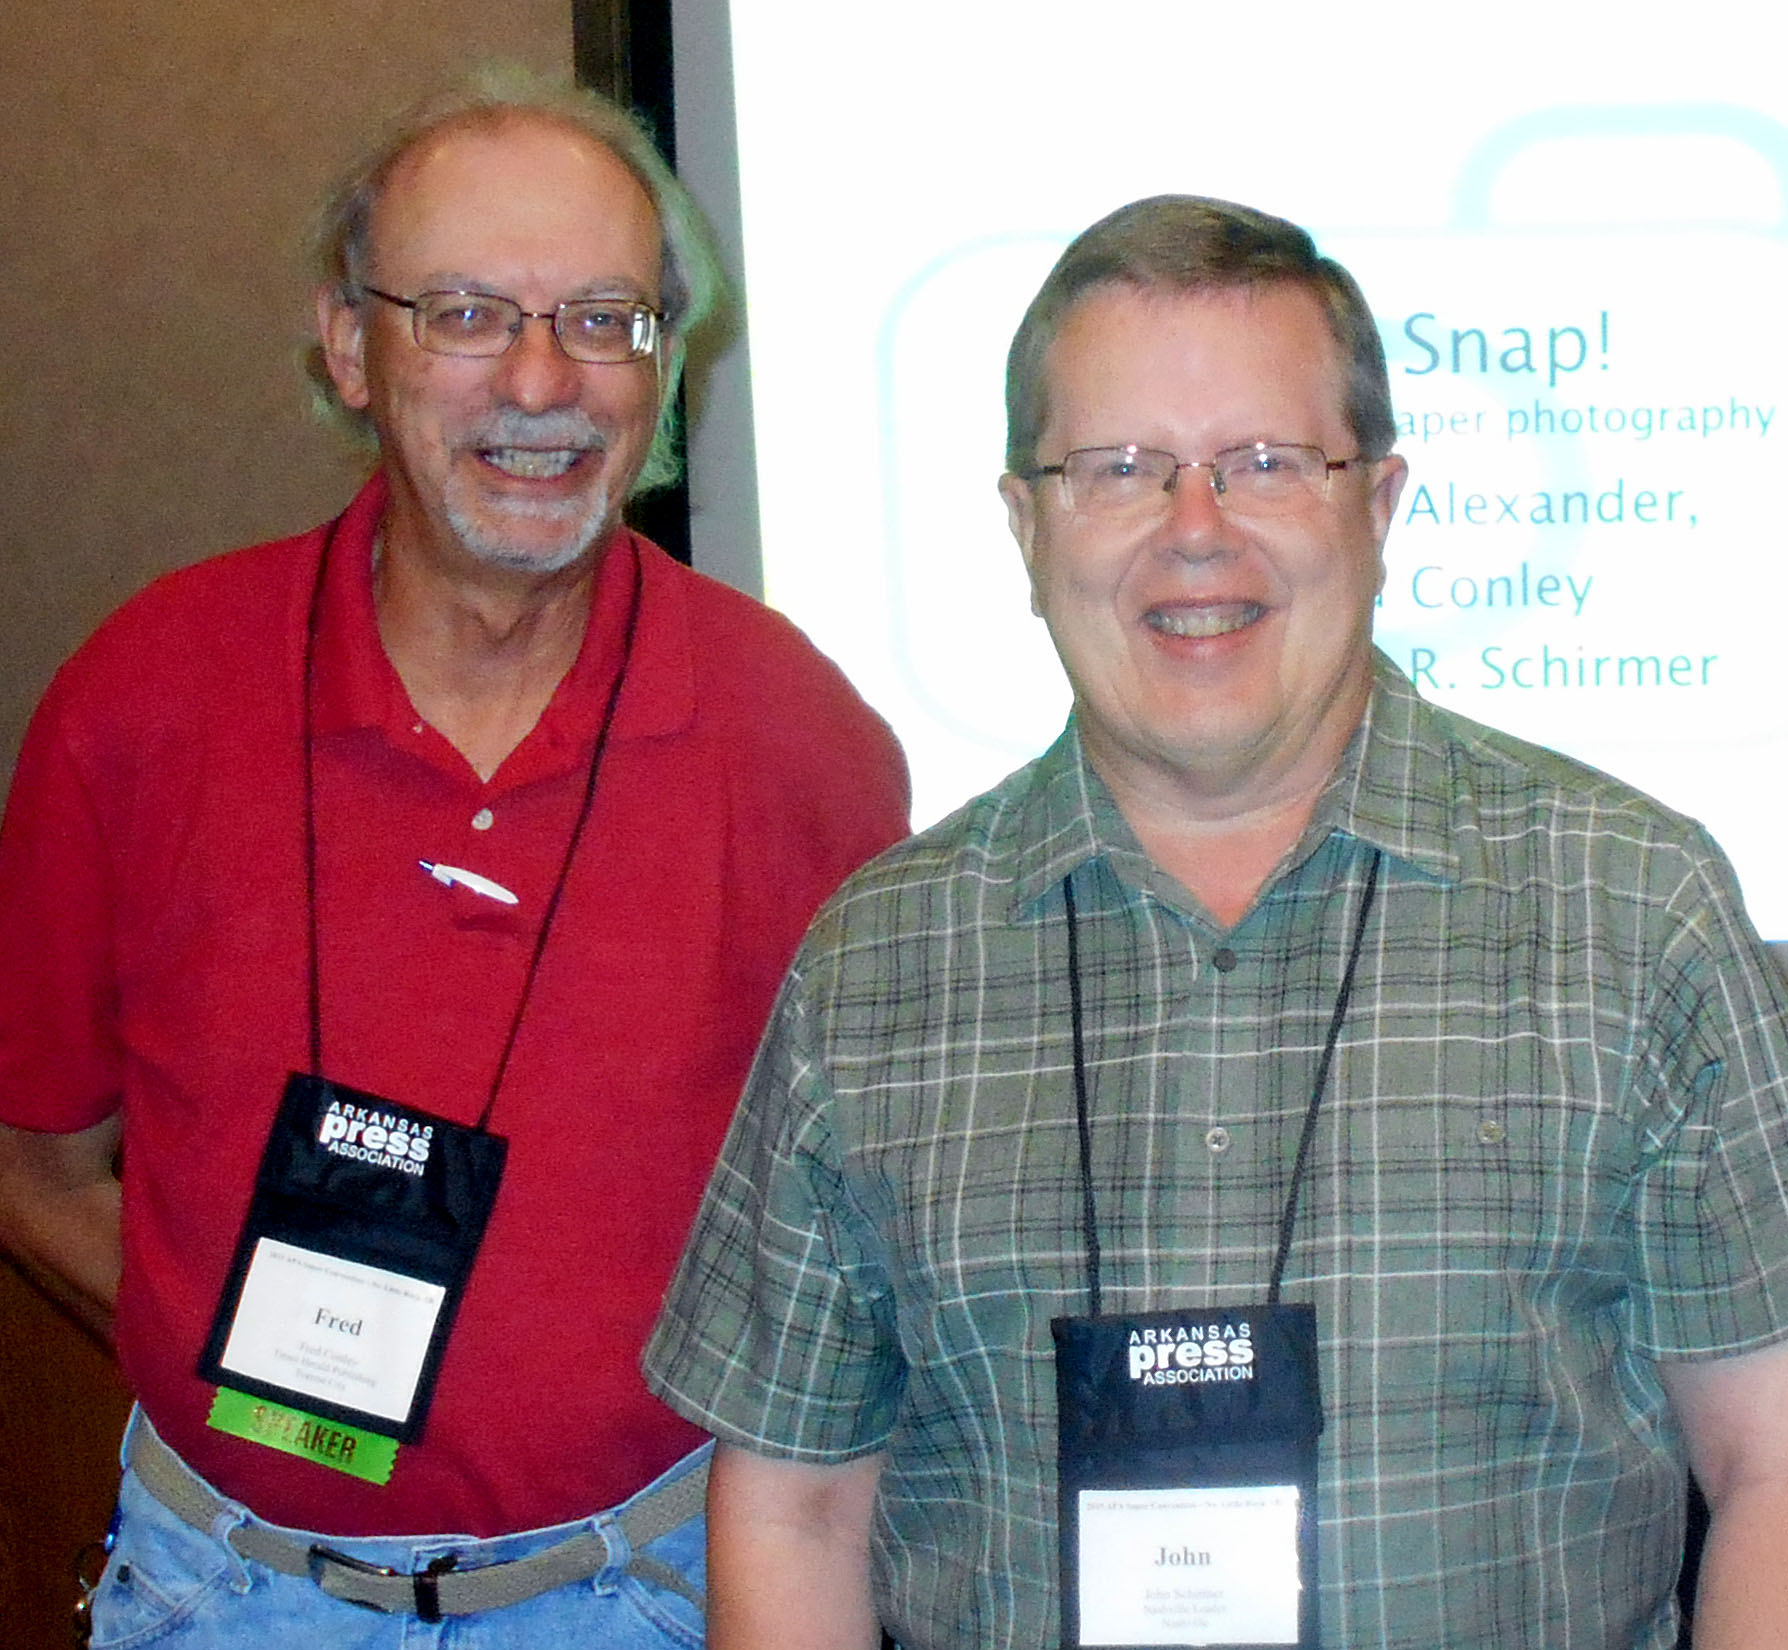 Presenters Fred Conley of the Forrest City Times Herald and John R. Schirmer of The Nashville Leader presented a New Photography session at the APA convention.